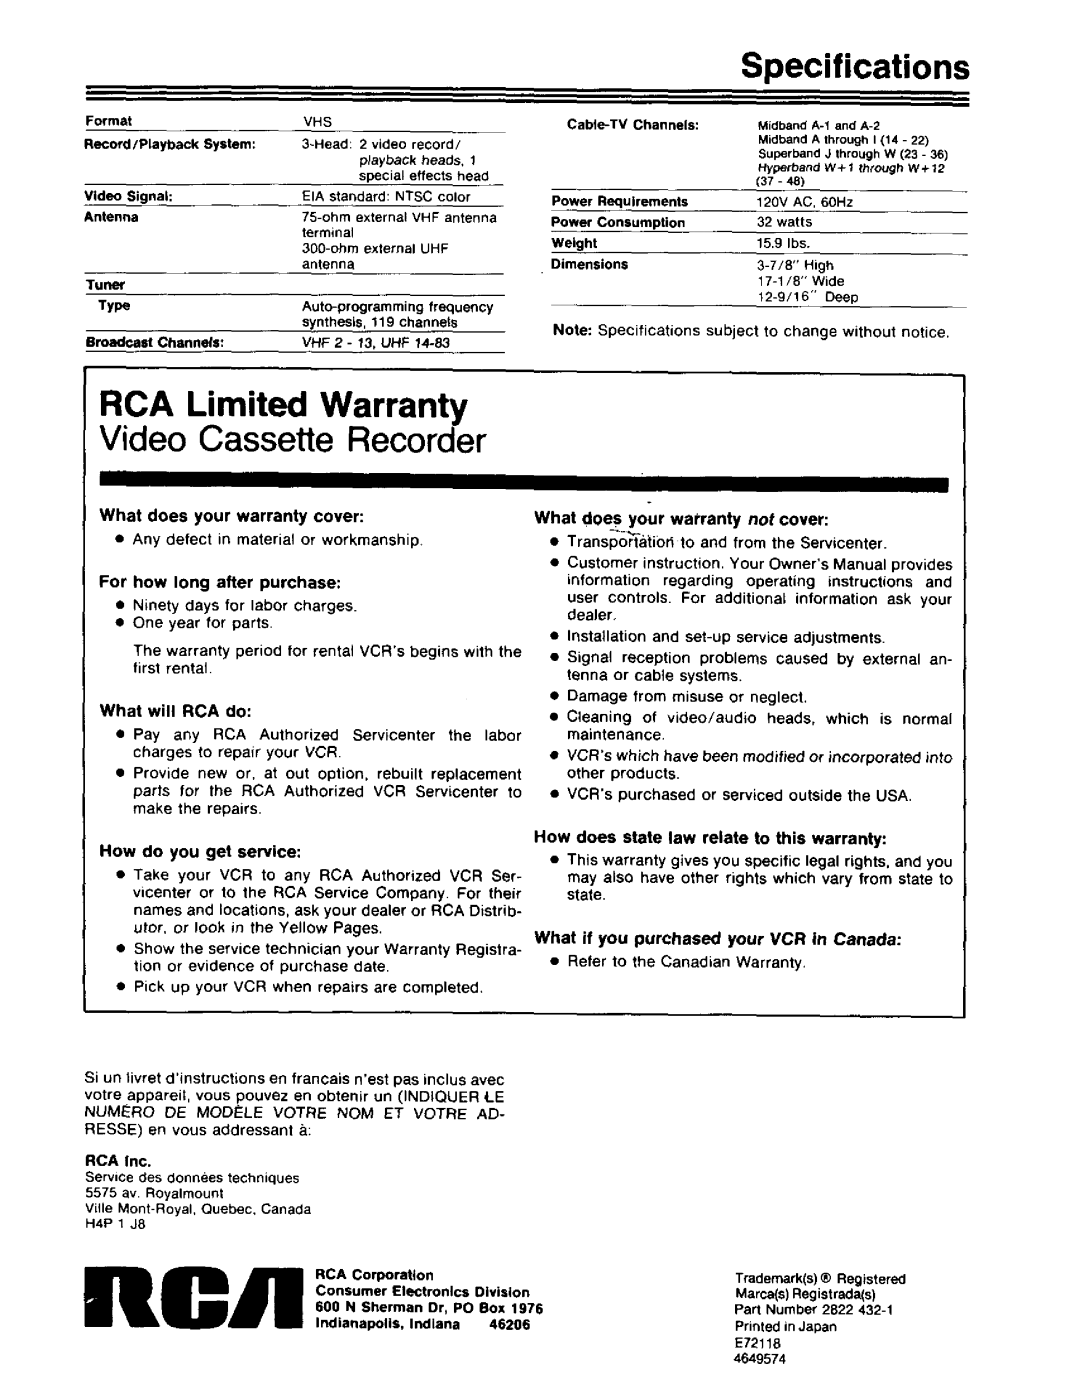 RCA 390 Ilia, Specifications, RCA Limited Warranty, Video Cassette Recorder, Iiii, What does your warranty cover 